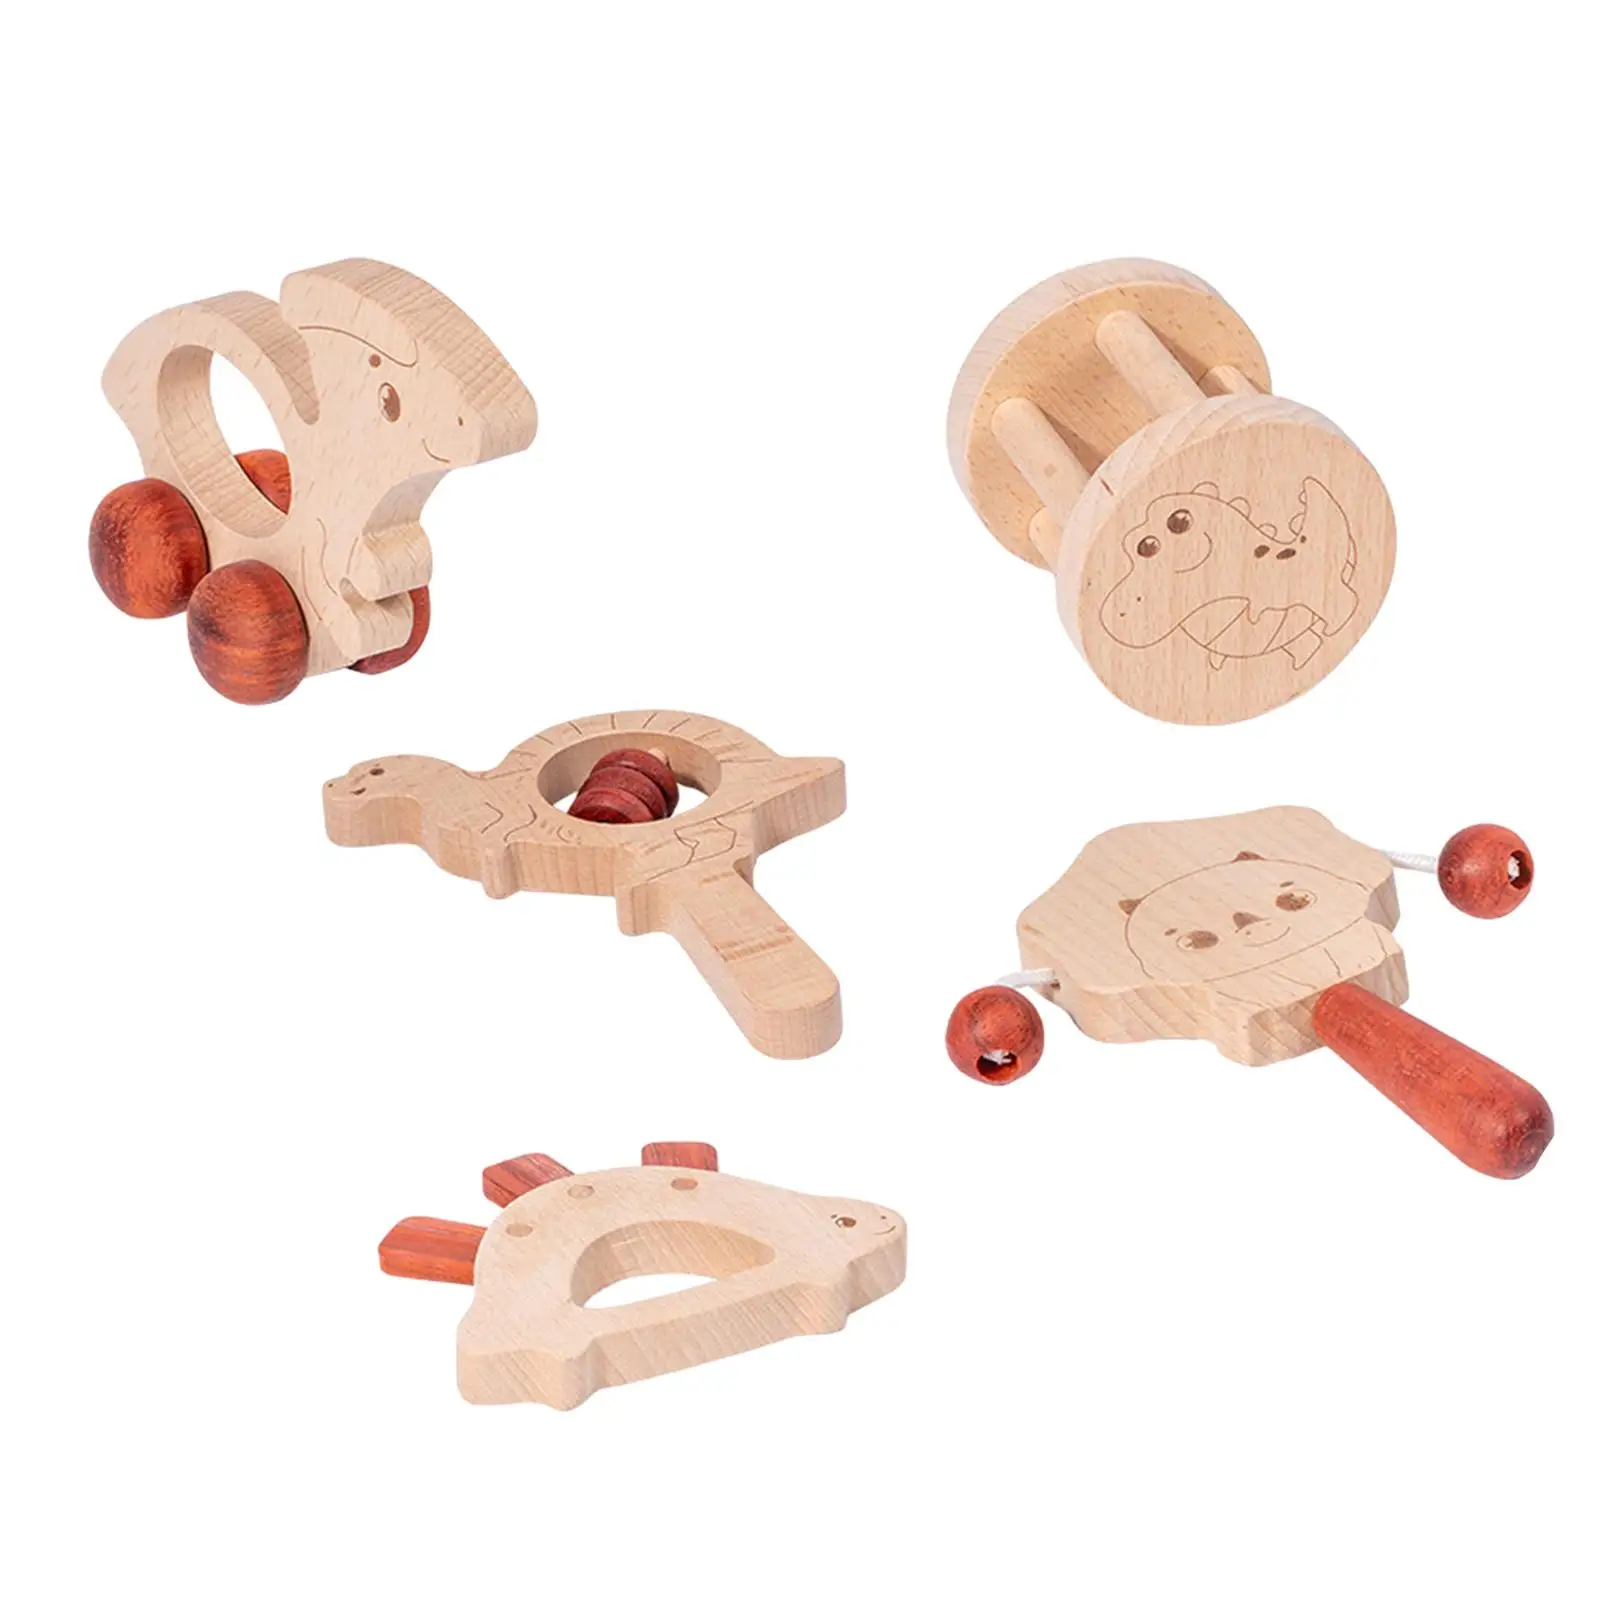 5Pcs Wooden Baby Toy Set Wood Car Early Learning Baby Rattle Wood Toy Rattles Montessori Toys for Babies Infant 6-12 Months